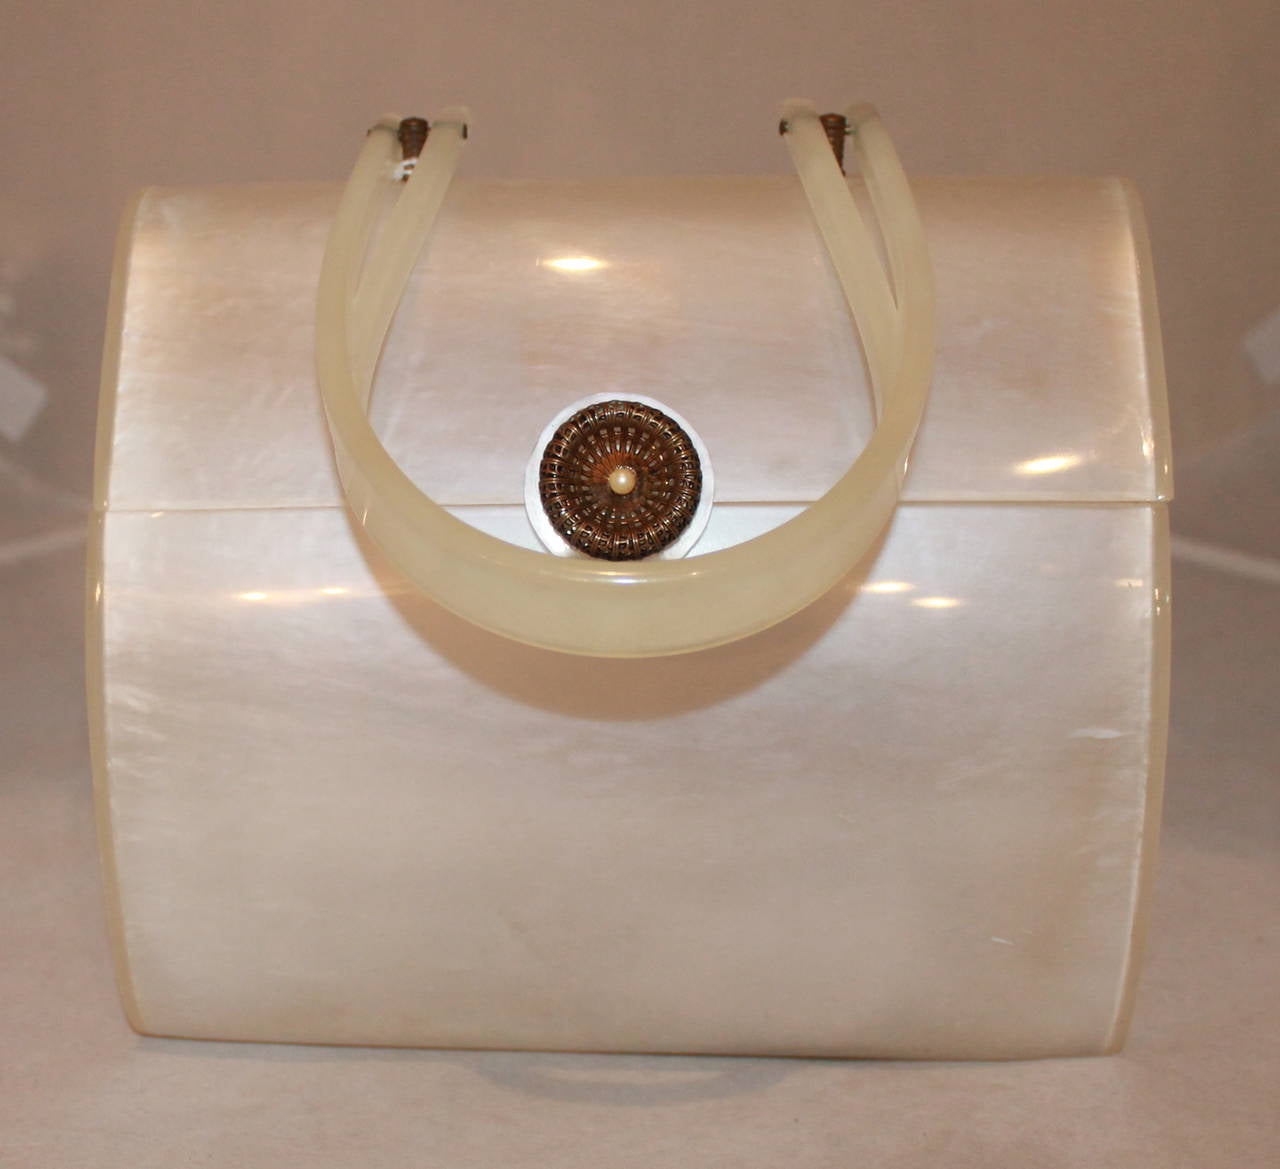 Wilardy Vintage Large White Frosted Lucite Handbag - circa 1950s. This vintage handbag is in excellent condition. Lucite bags are often not found in such a large size, this is a rare piece.

Measurements:
Length- 8